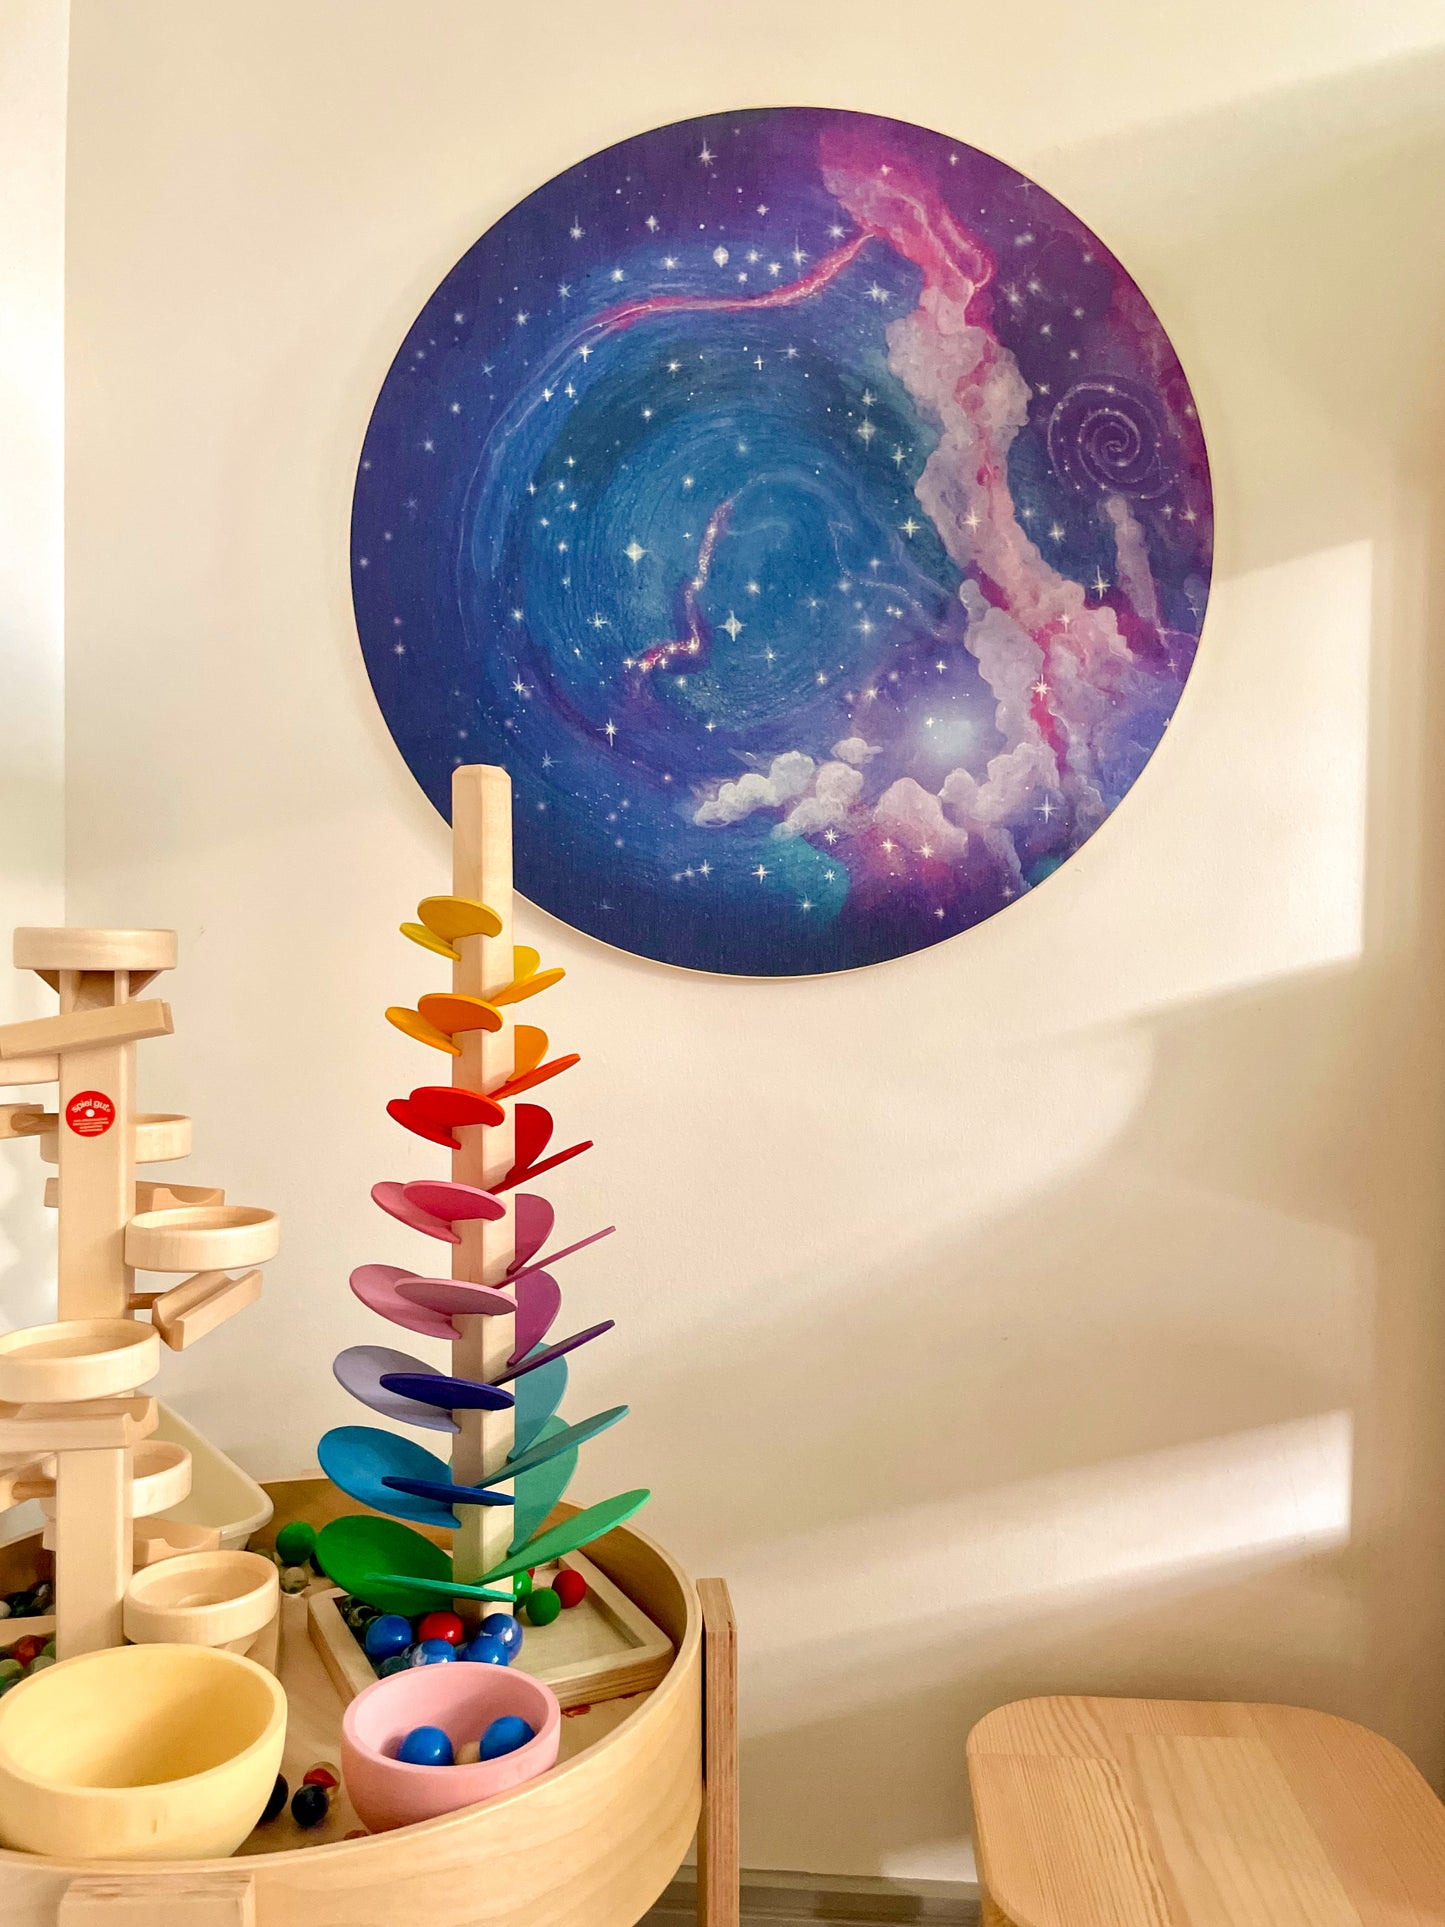 Wild Space Playscape board